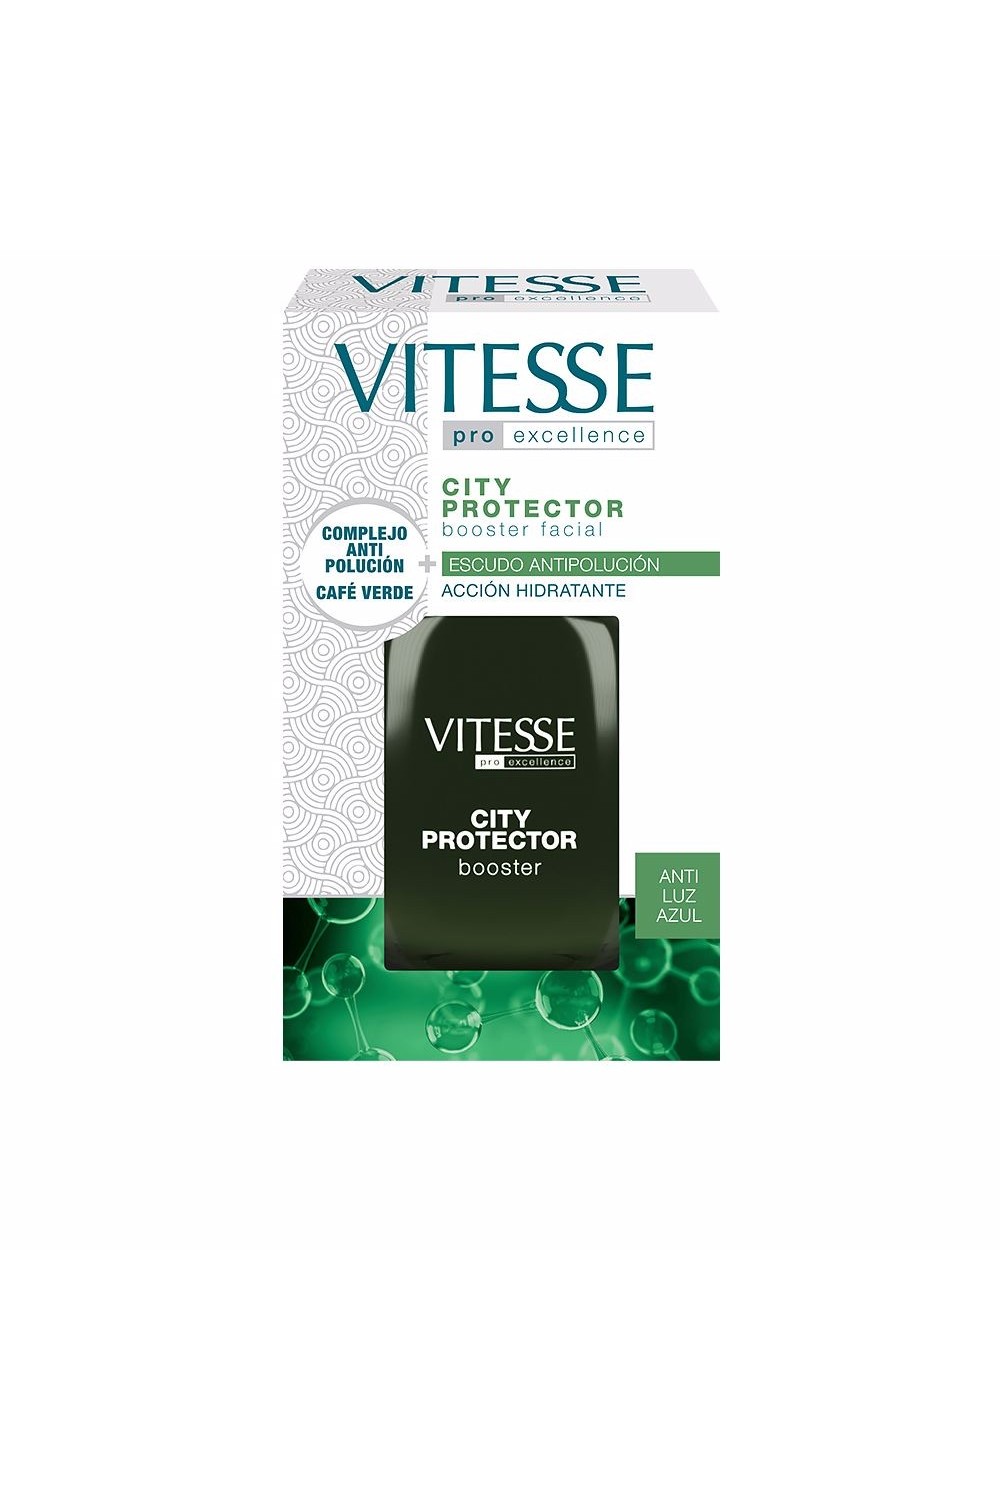 Vitesse City Protector Booster Facial 30ml